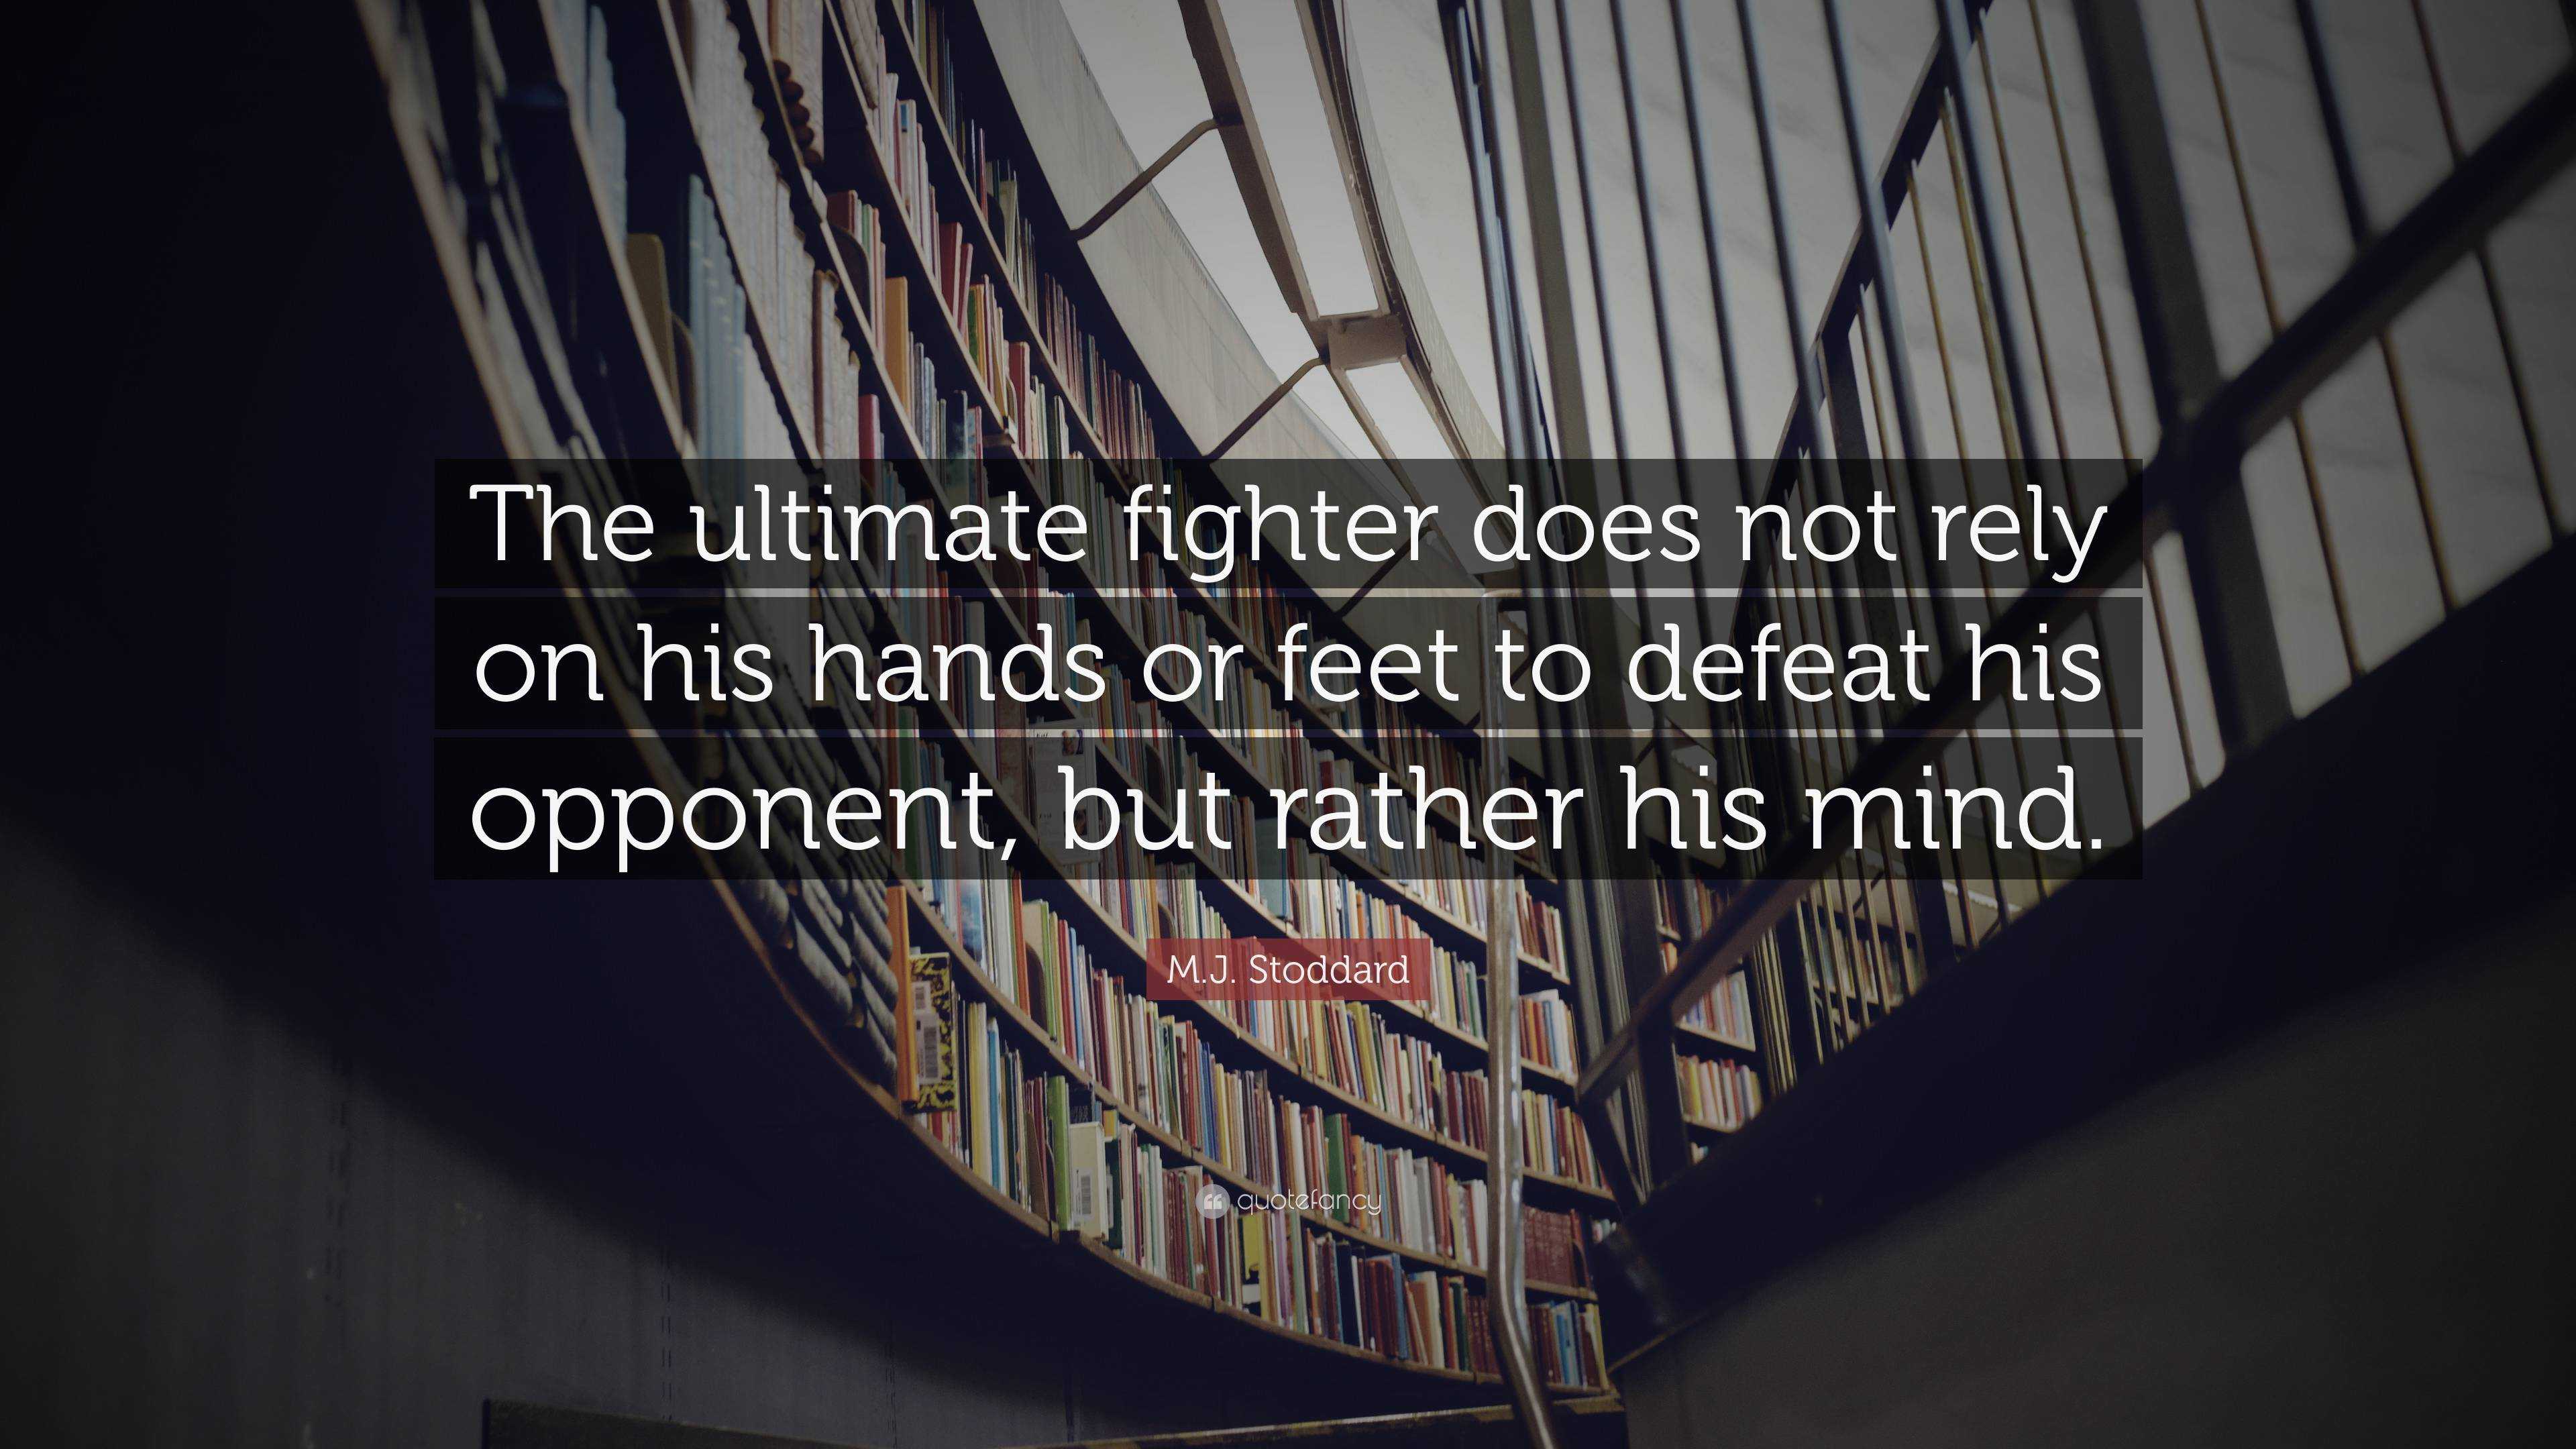 M.J. Stoddard Quote: “The ultimate fighter does not rely on his